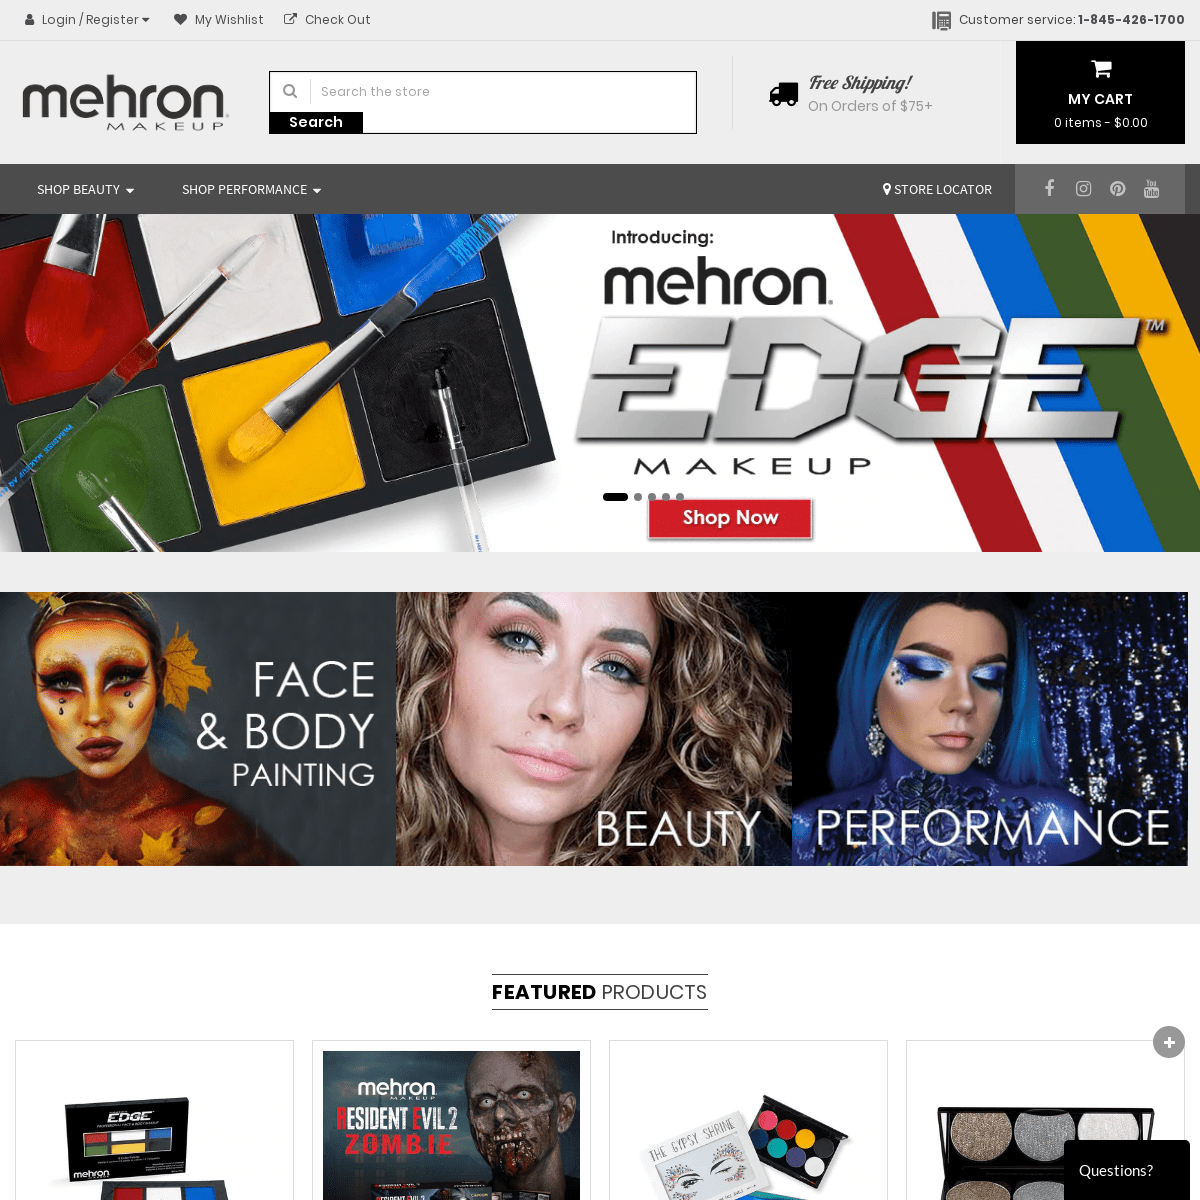 Professional Beauty and Performance Makeup | Mehron Official Site